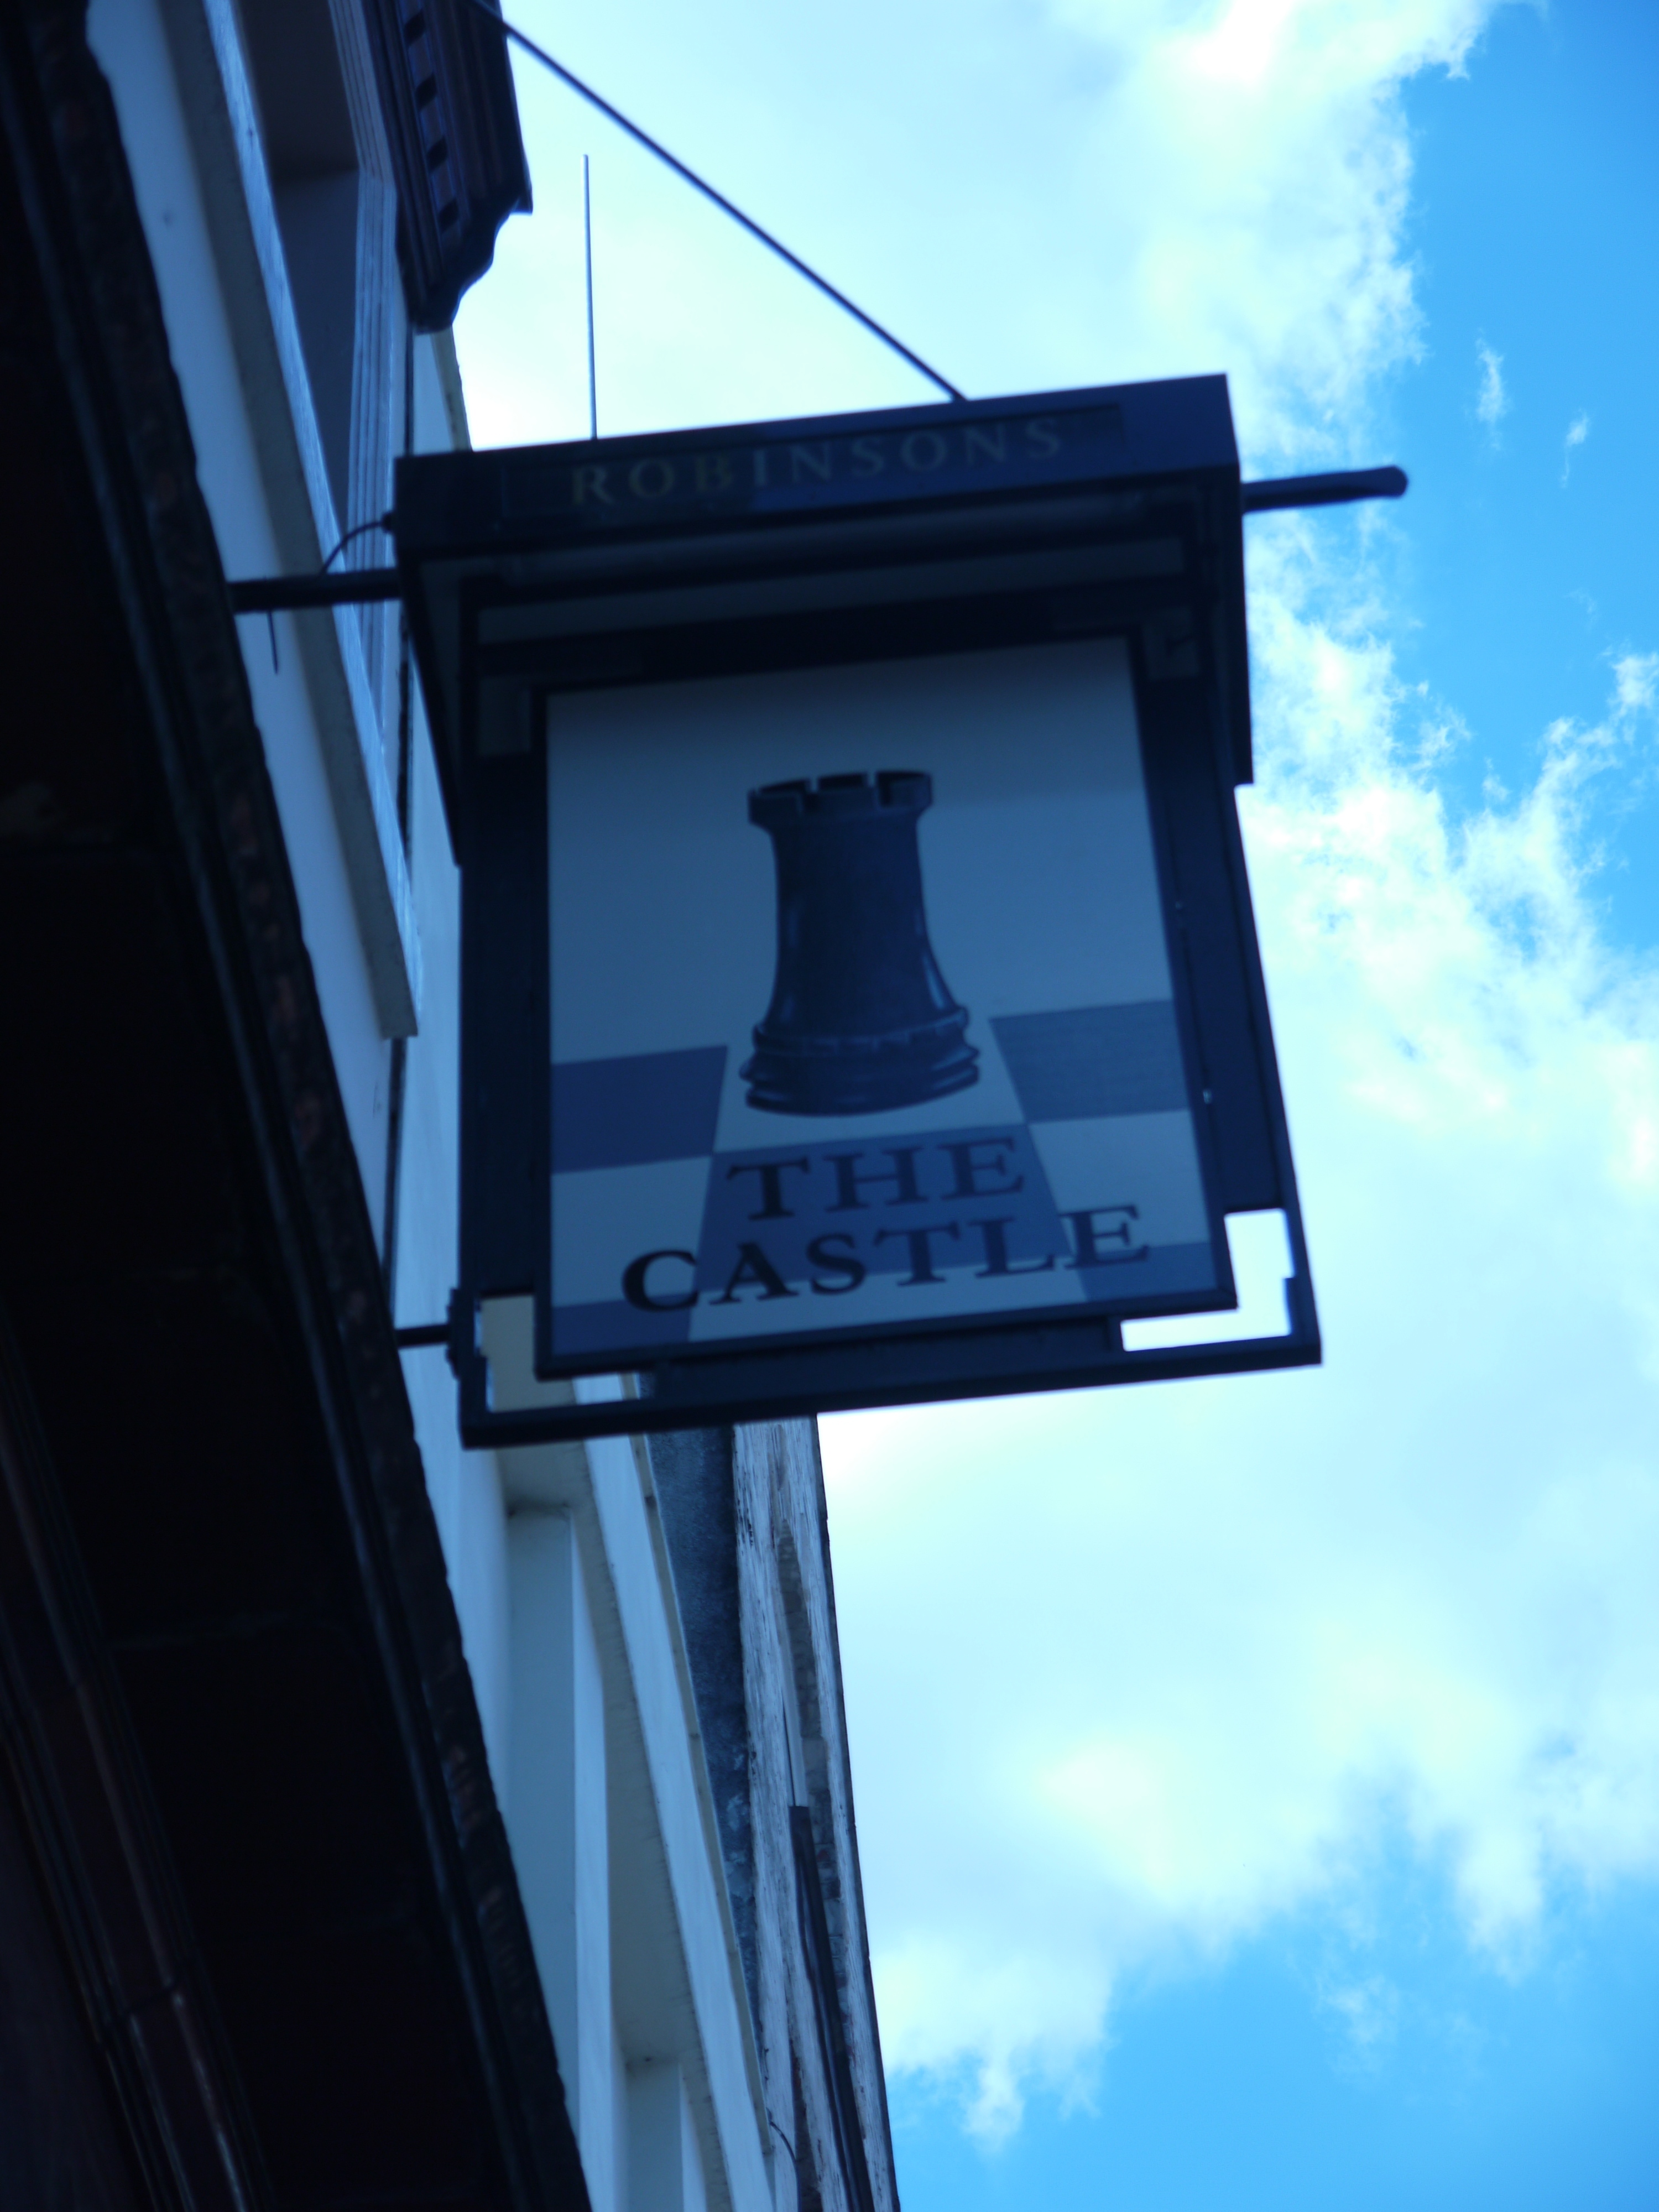 Pub sign for The Castle Hotel, Manchester, taken by me